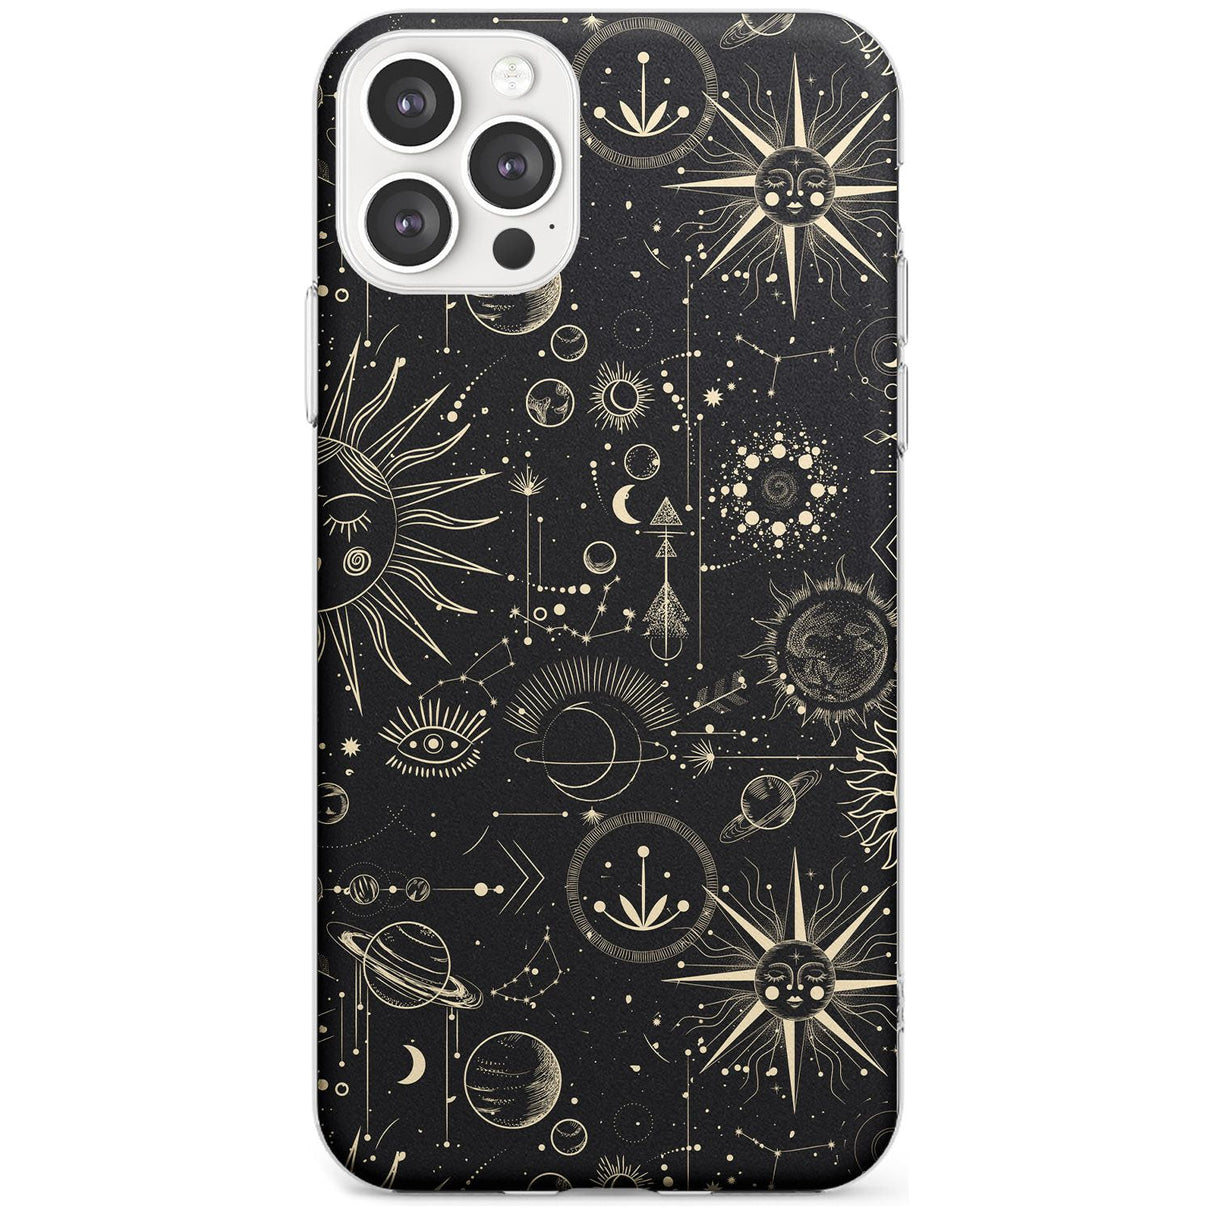 Suns & Planets Black Impact Phone Case for iPhone 11 Pro Max